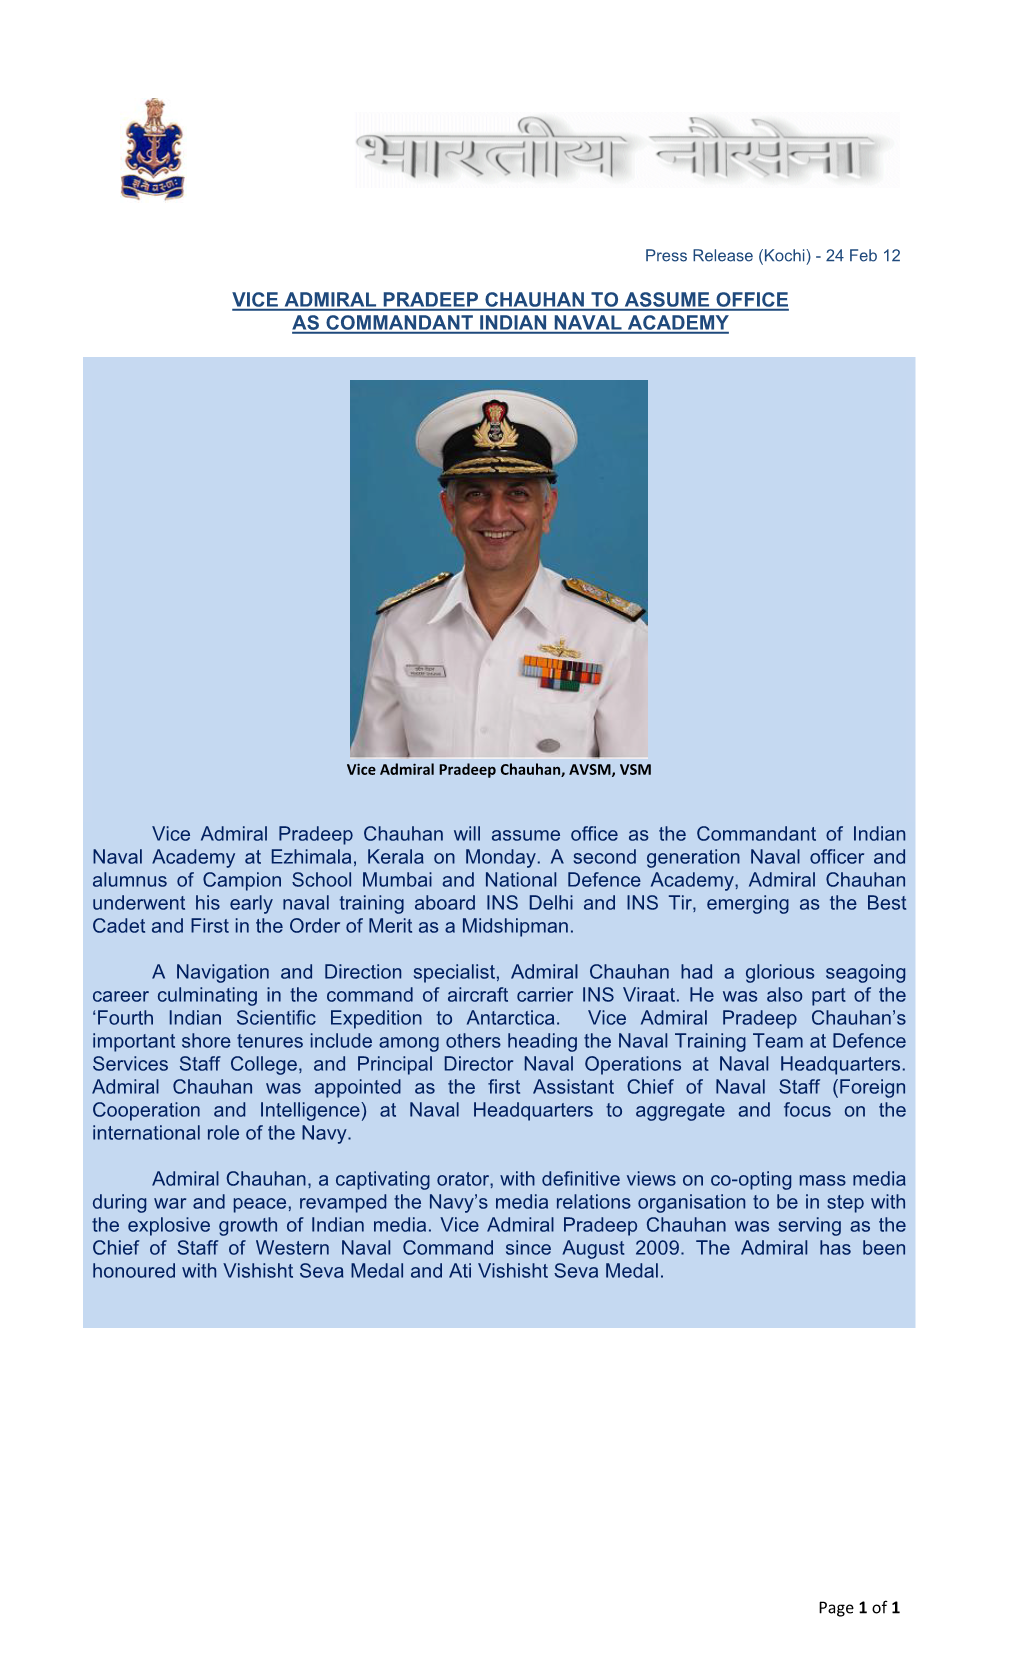 Vice Admiral Pradeep Chauhan to Assume Office As Commandant Indian Naval Academy